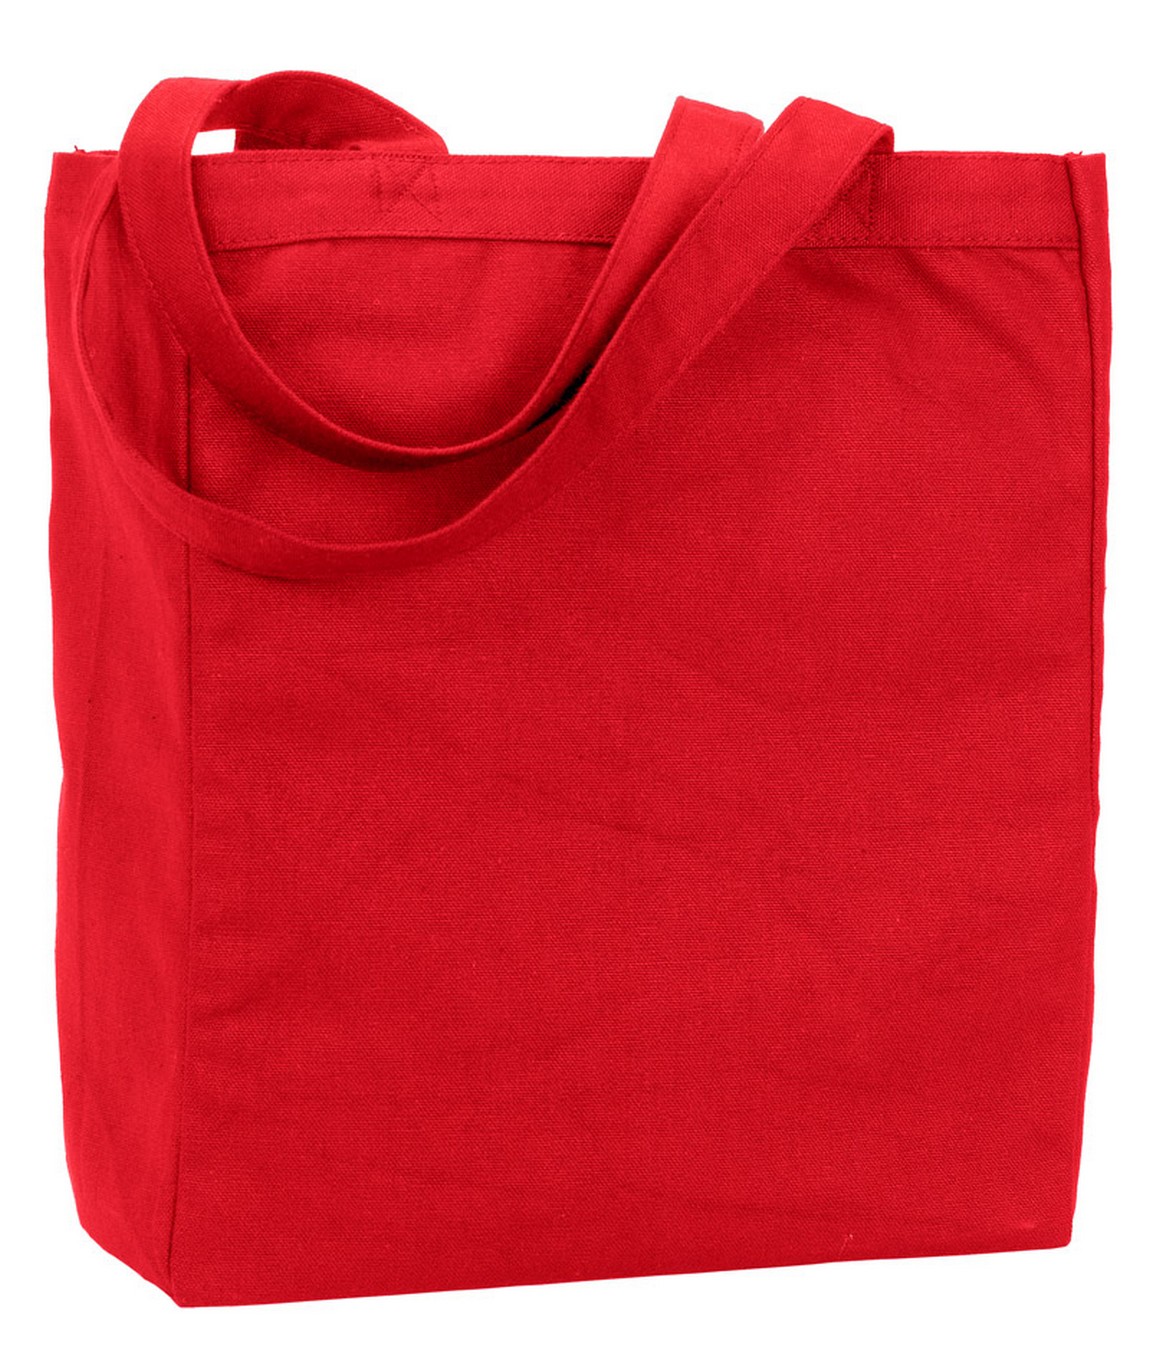 Long handle red tote bags